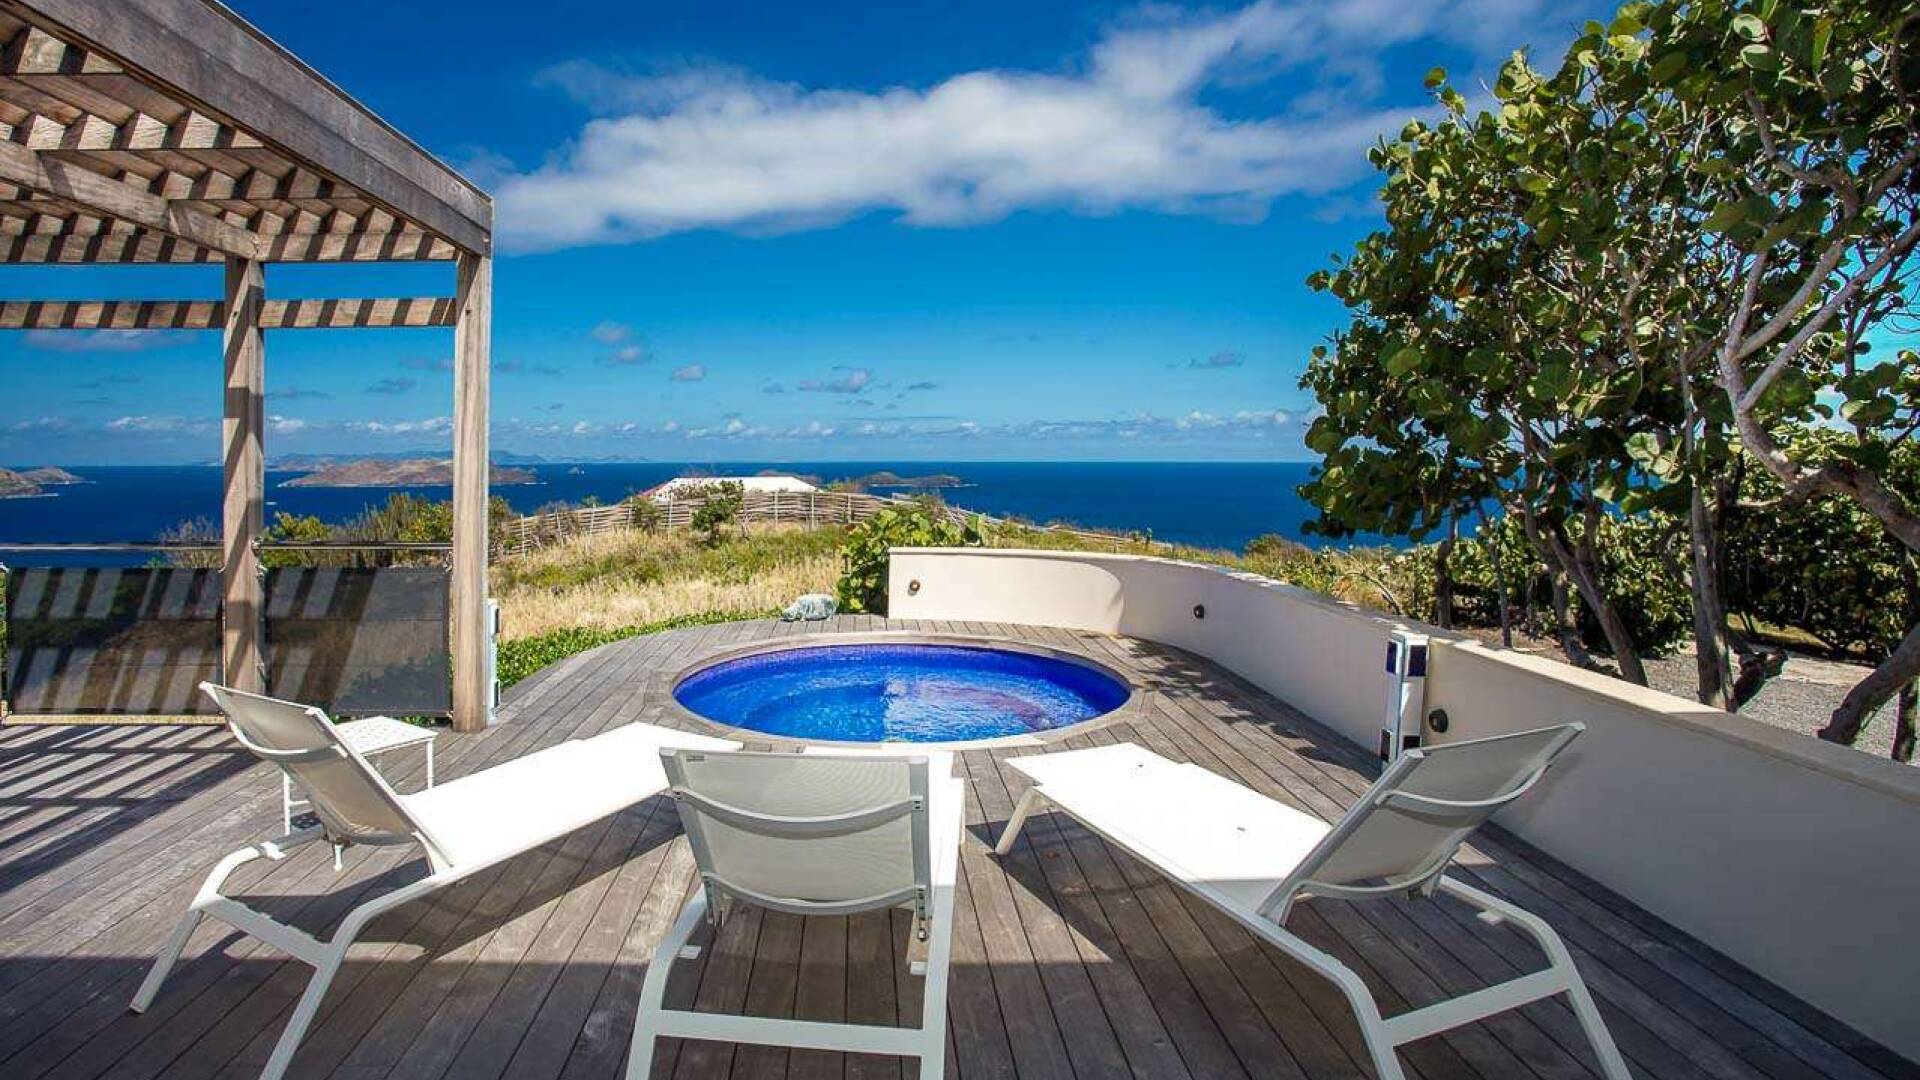 Jacuzzi at WV YEB, Pointe Milou, St. Barthelemy